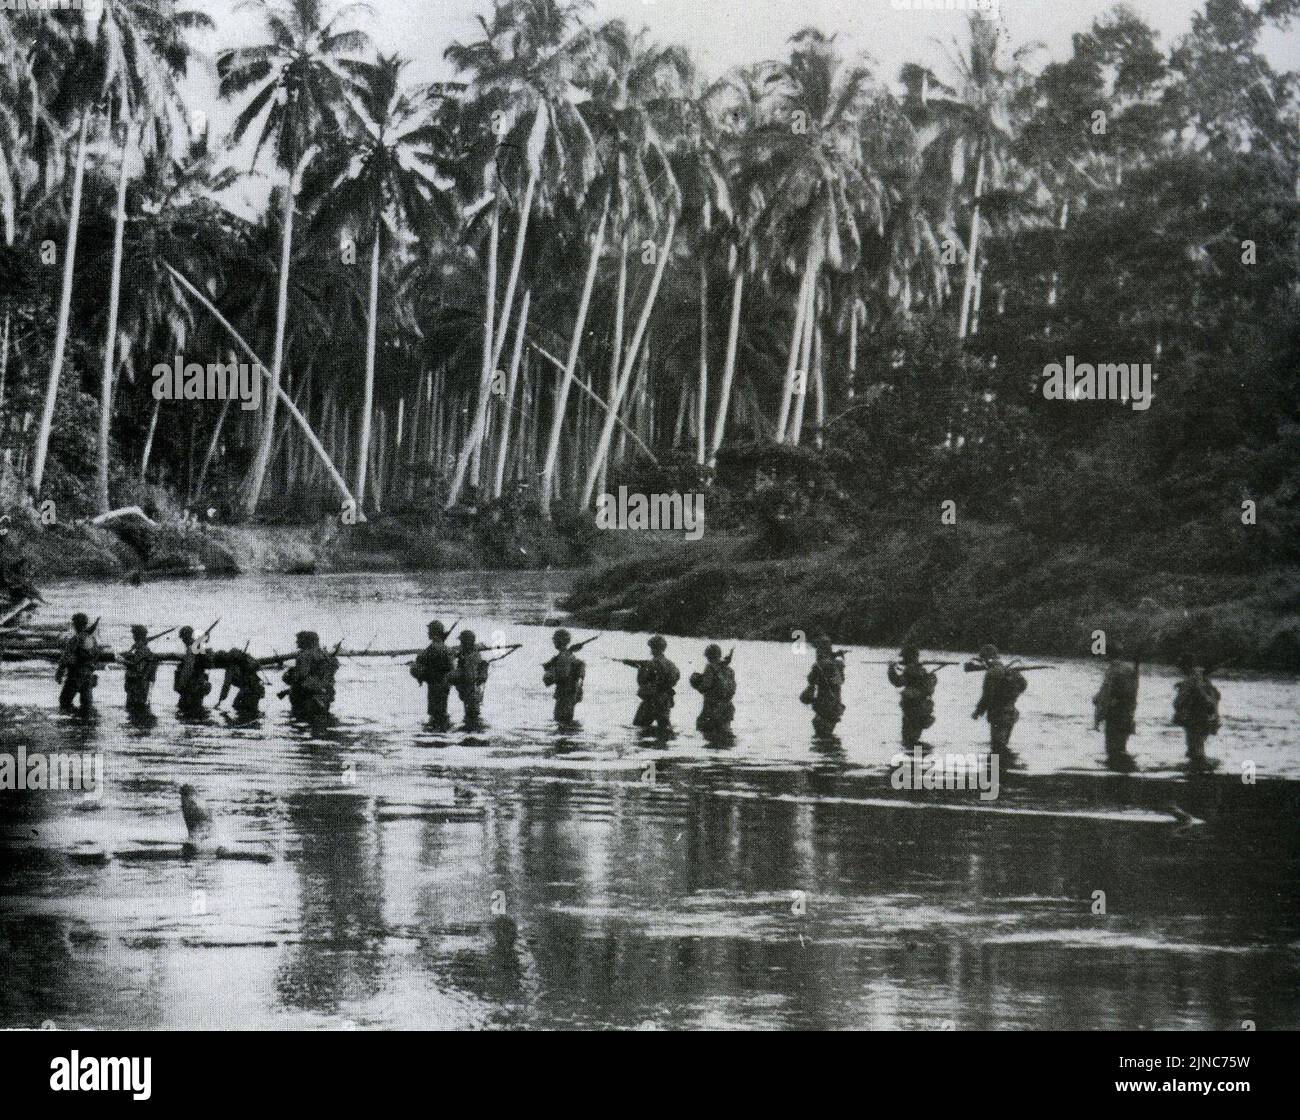 A U.S. Marine patrol crosses the Matanikau River in September 1942 during the Battle of Guadalcanal Stock Photo